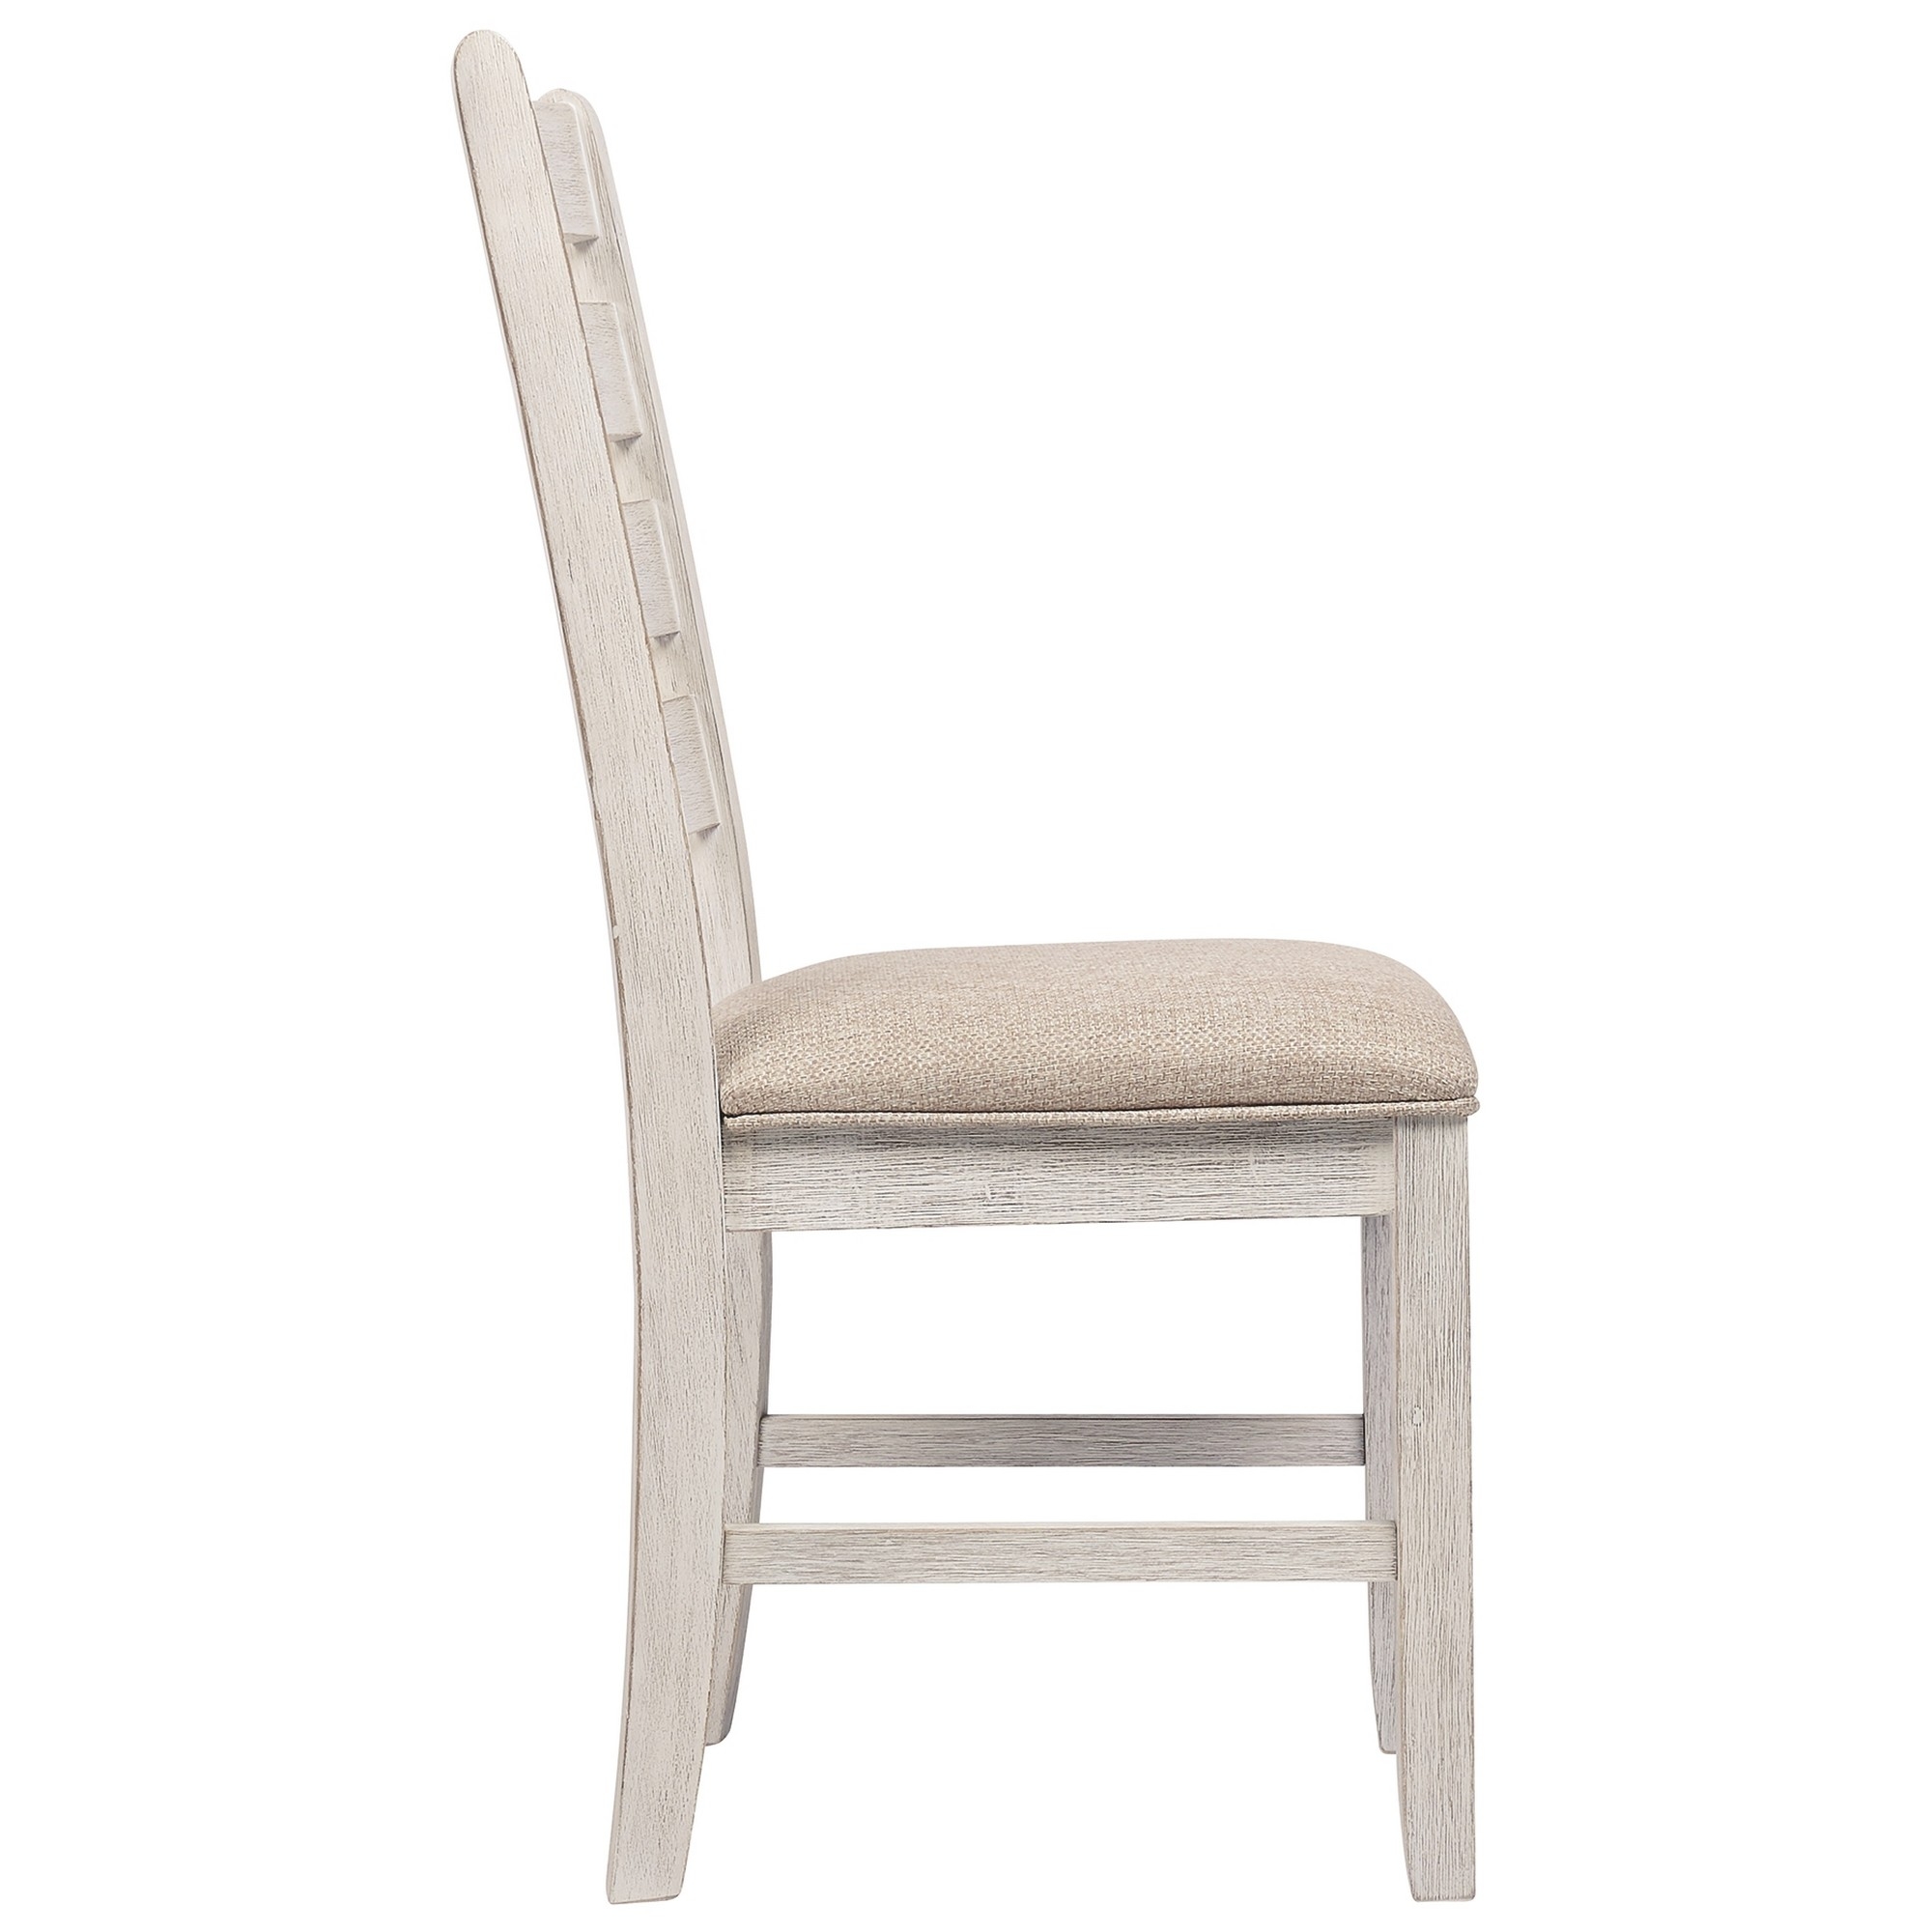 Fabric Dining Side Chair With Ladder Back, Set Of 2, White And Brown- Saltoro Sherpi